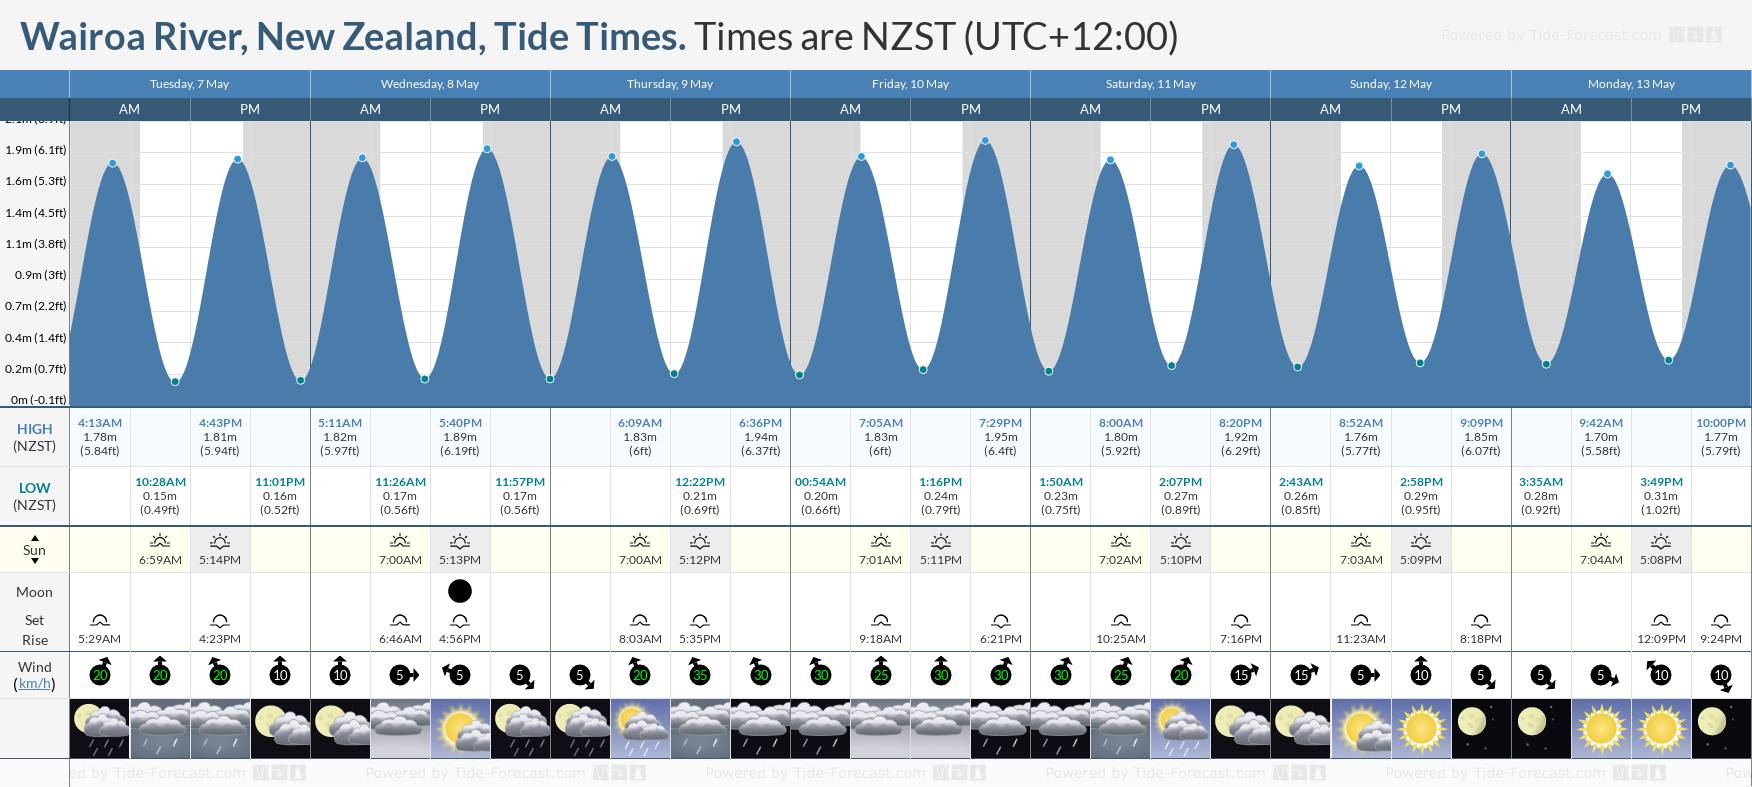 Wairoa River, New Zealand Tide Chart including high and low tide tide times for the next 7 days